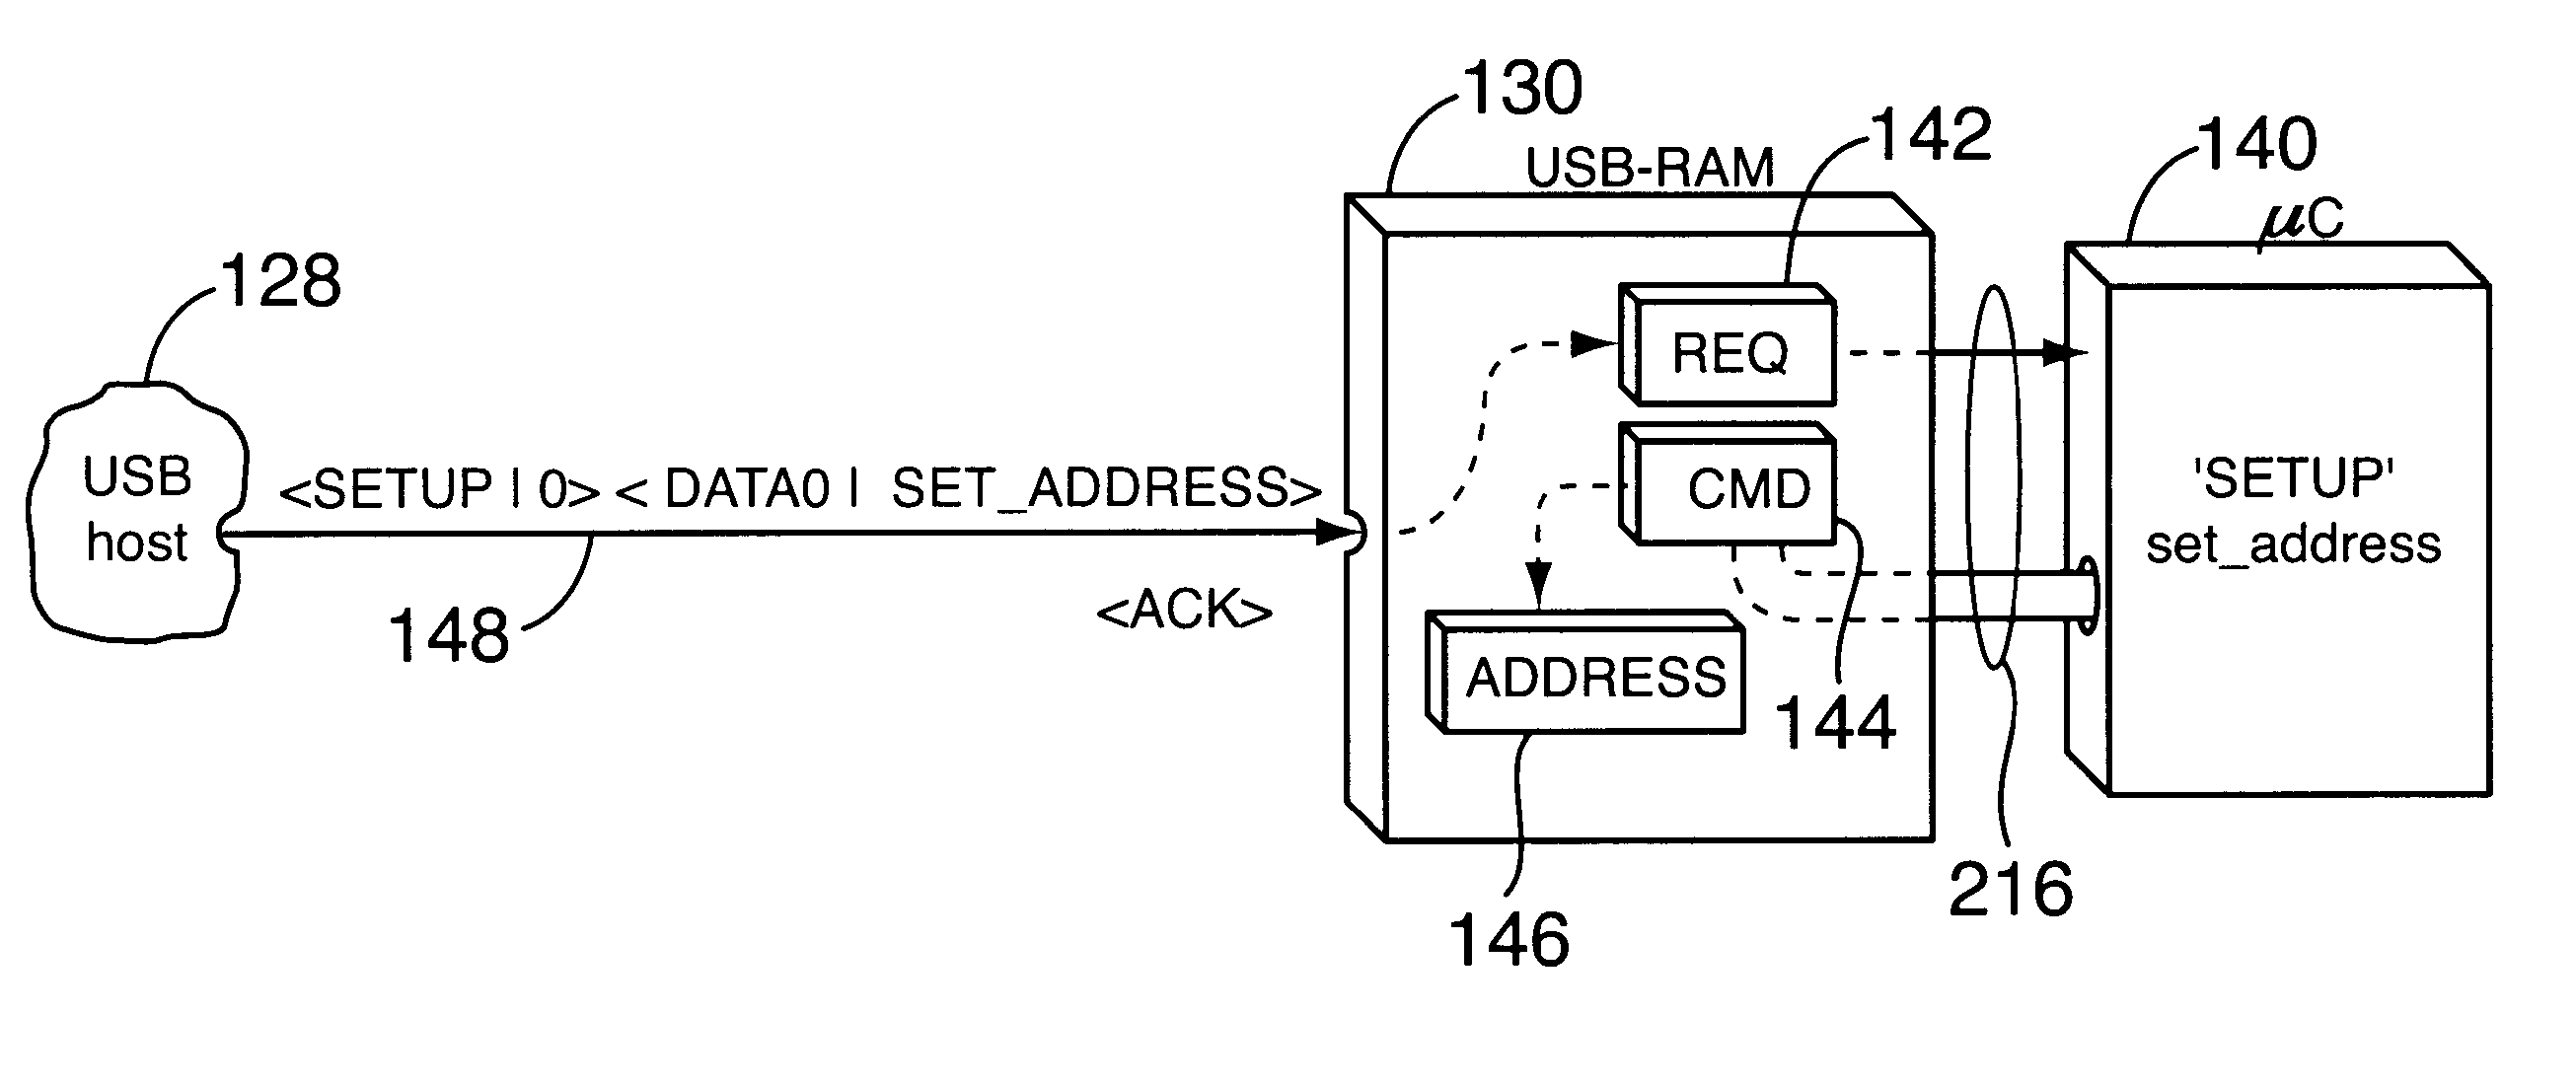 Universal serial bus (USB) RAM architecture for use with microcomputers via an interface optimized for integrated services device network (ISDN)